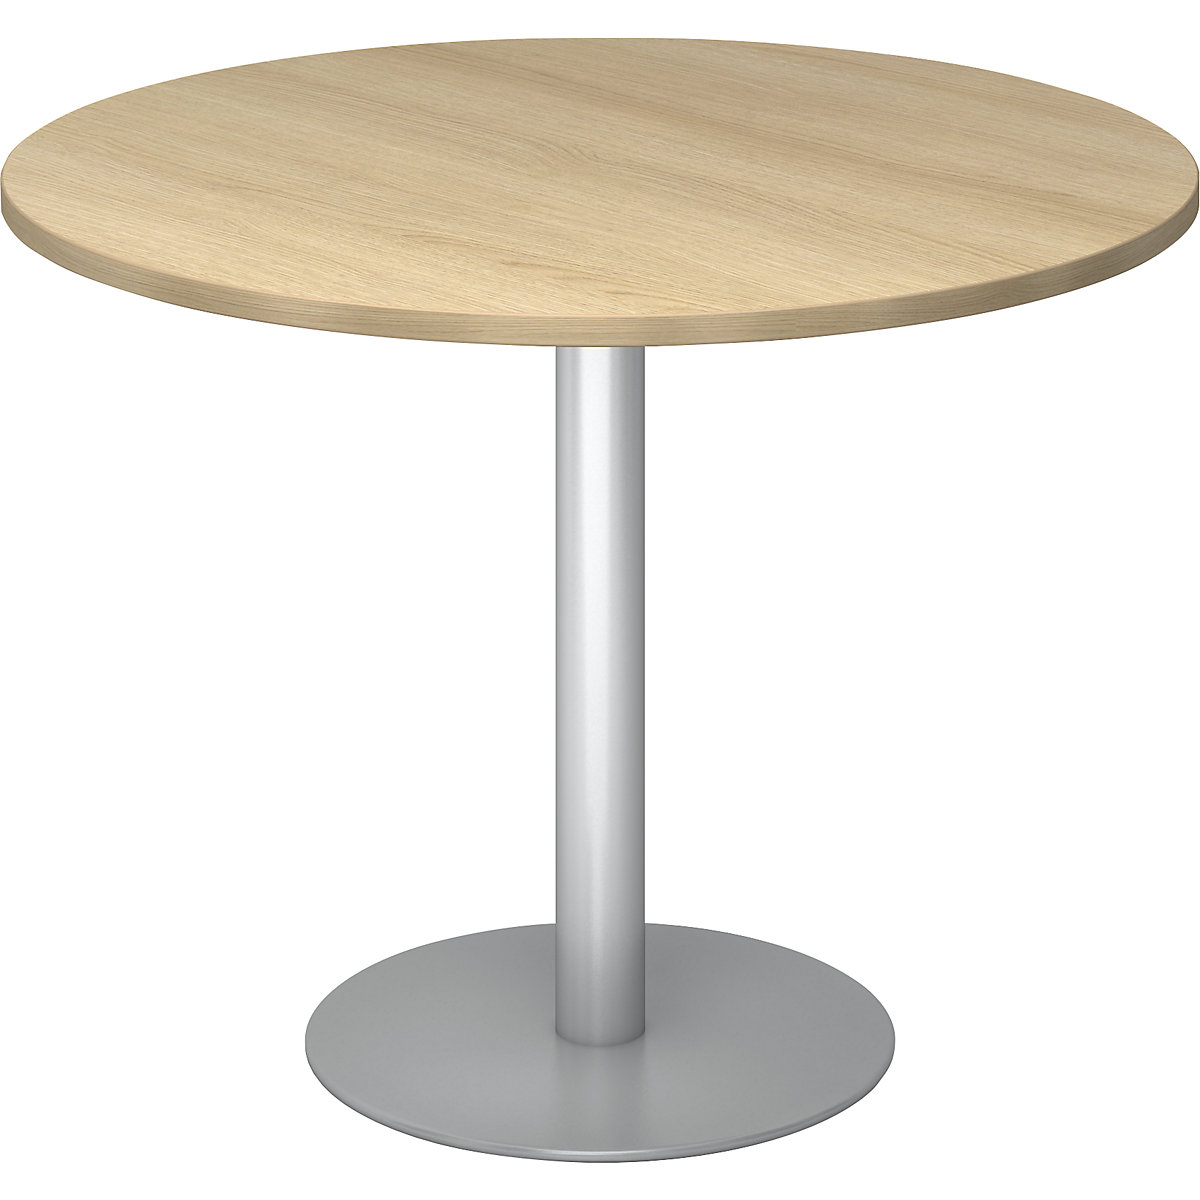 Conference table, Ø 1000 mm, 755 mm high, silver frame, tabletop in oak finish-6